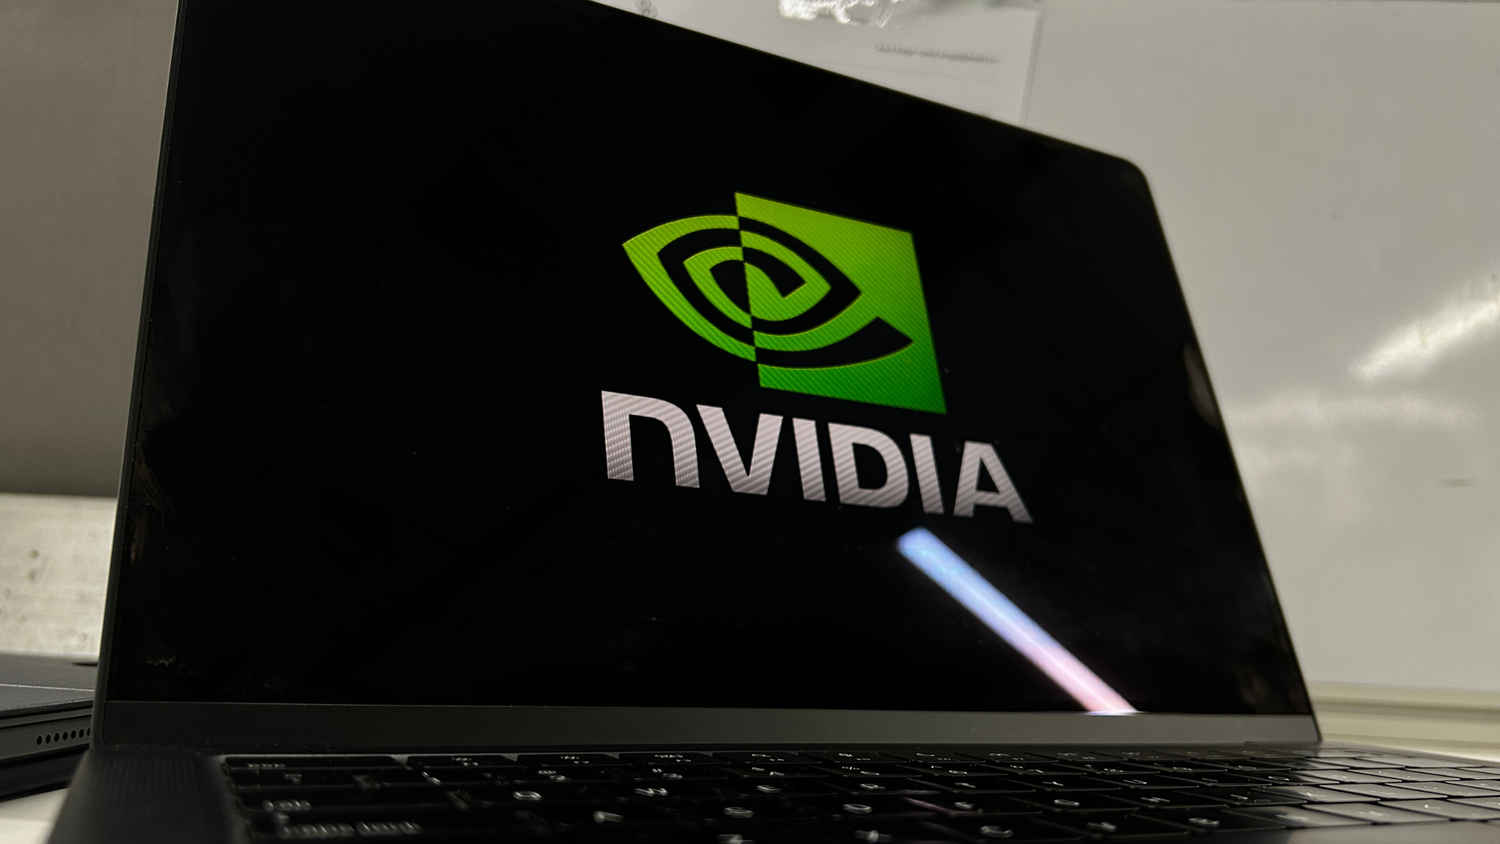 NVIDIA allegedly scraped Netflix and YouTube videos without permission to train its AI